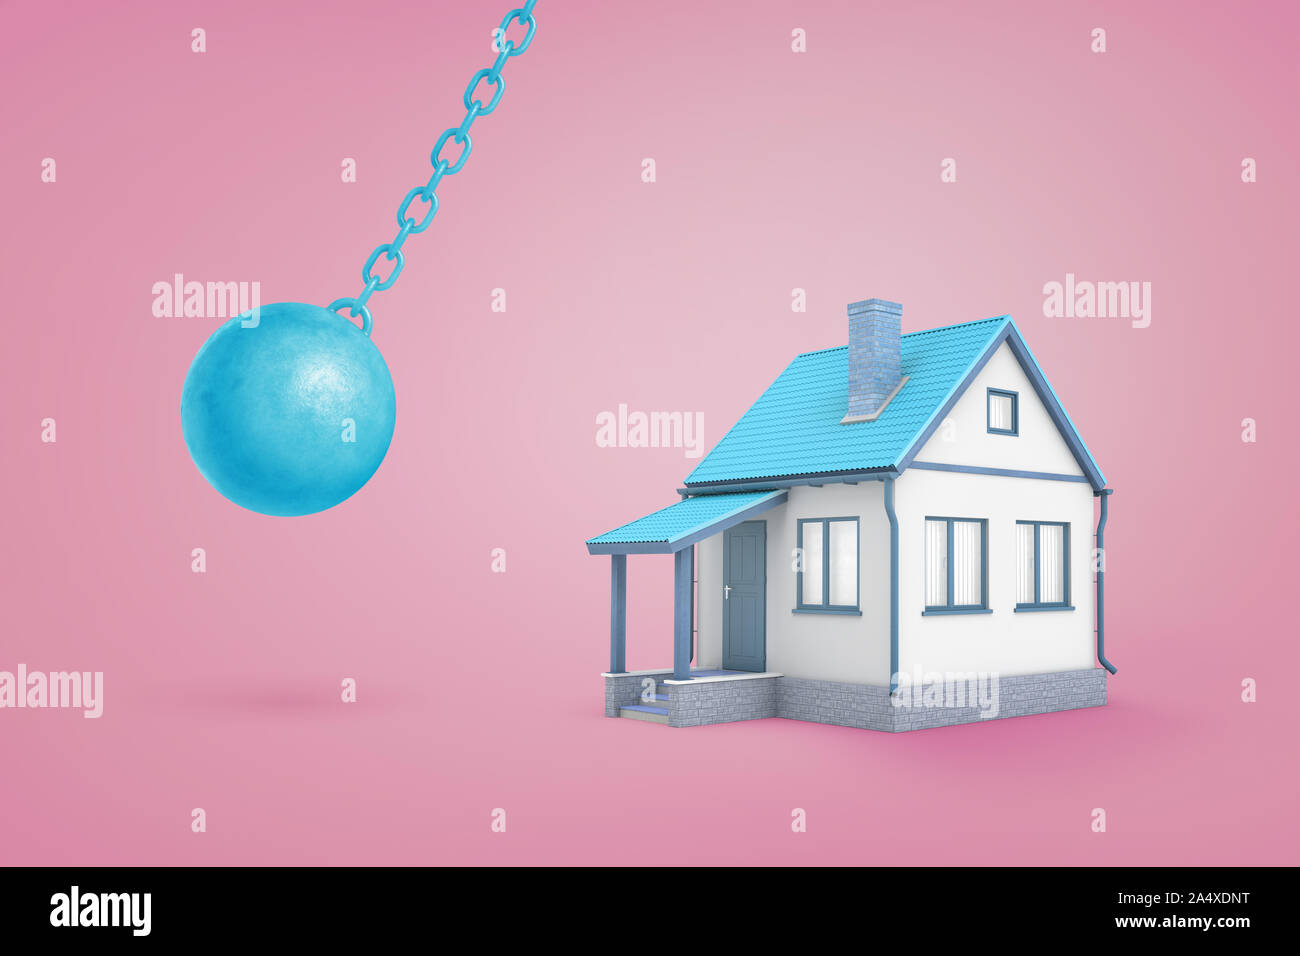 3d rendering of large blue iron wrecking ball ready to hit a small blue family house on a pink background. Stock Photo